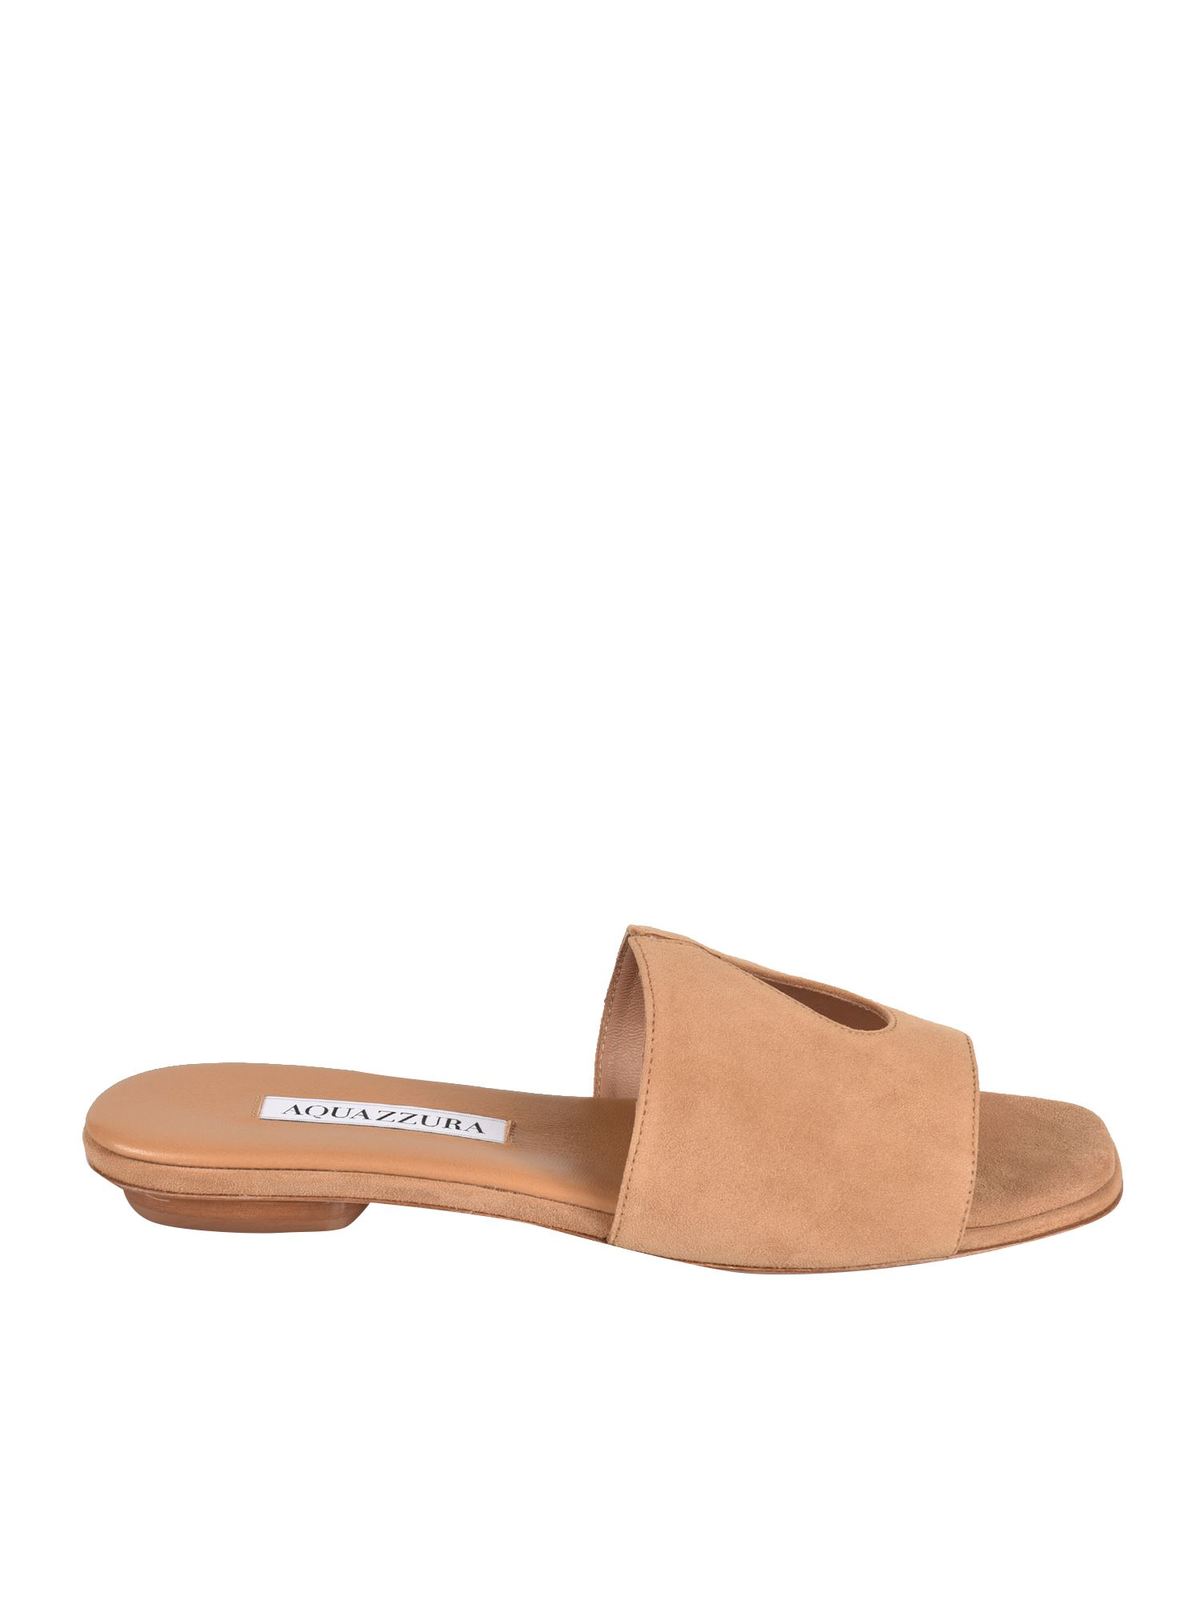 Aquazzura SEXY THING SLIDES IN SWEET HONEY COLOR